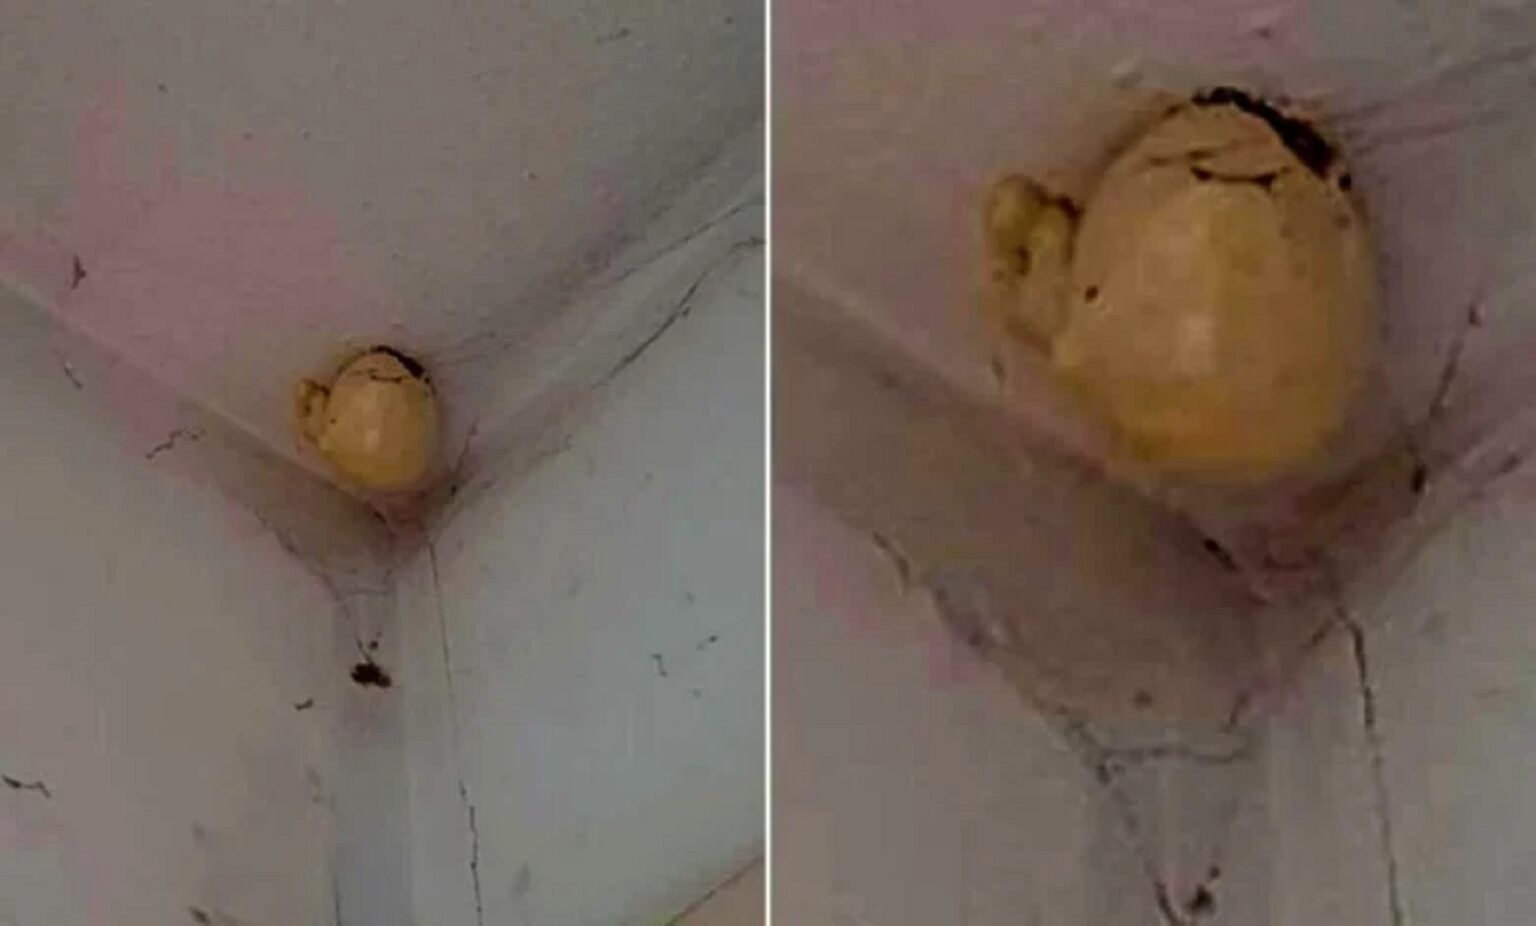 A woman asked on Facebook what was the bizarre “egg” that appeared on the ceiling of her room